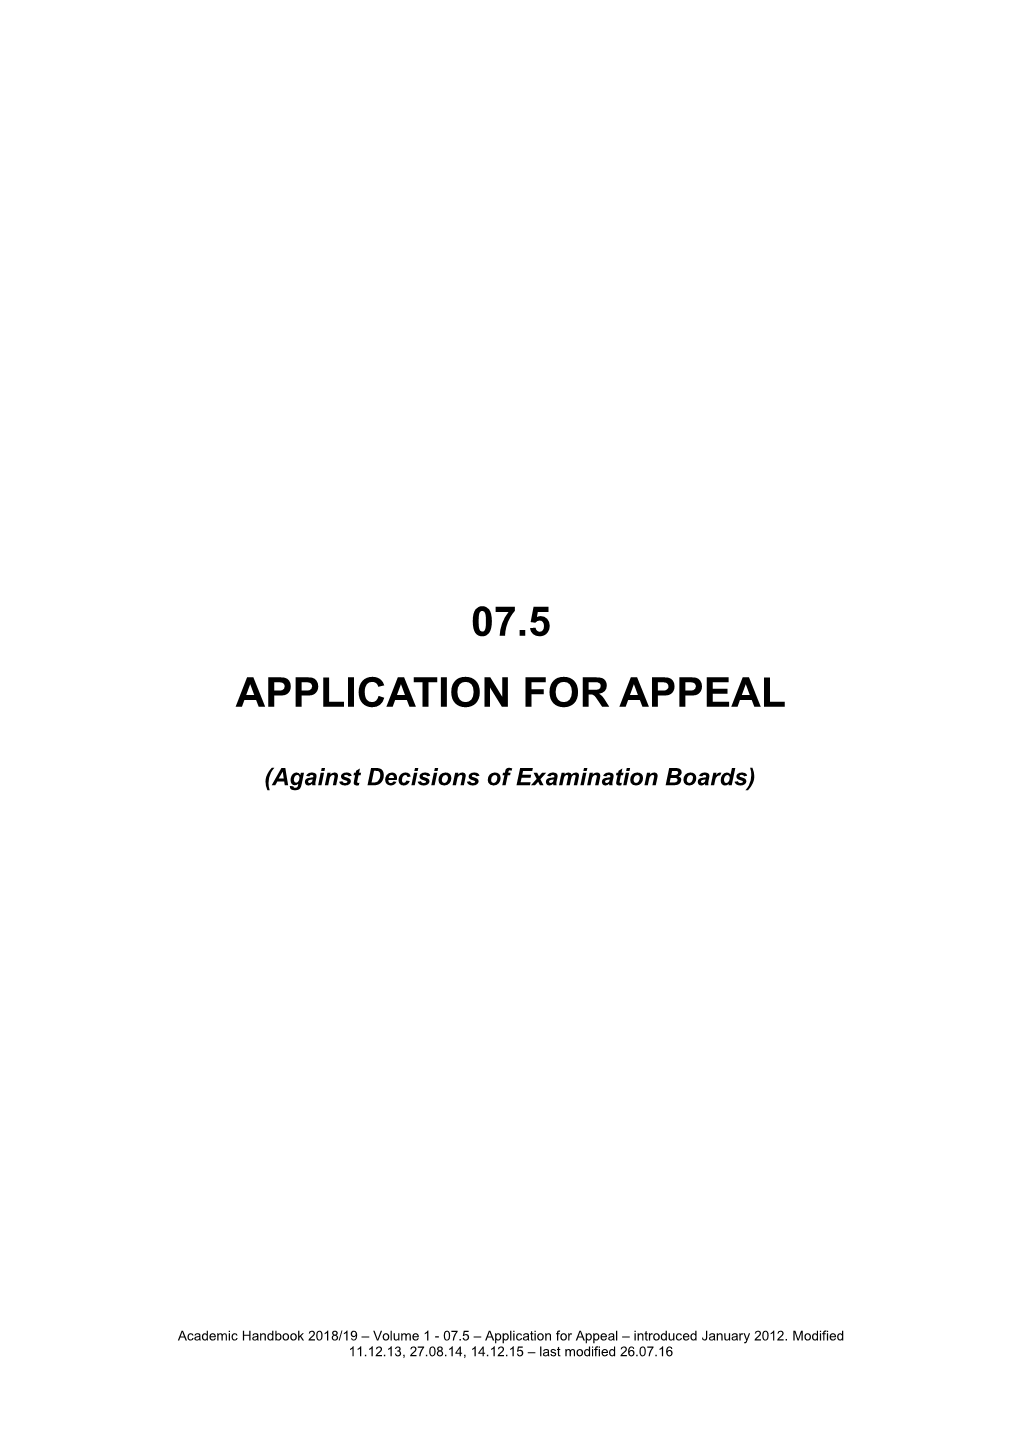 Application for Appeal